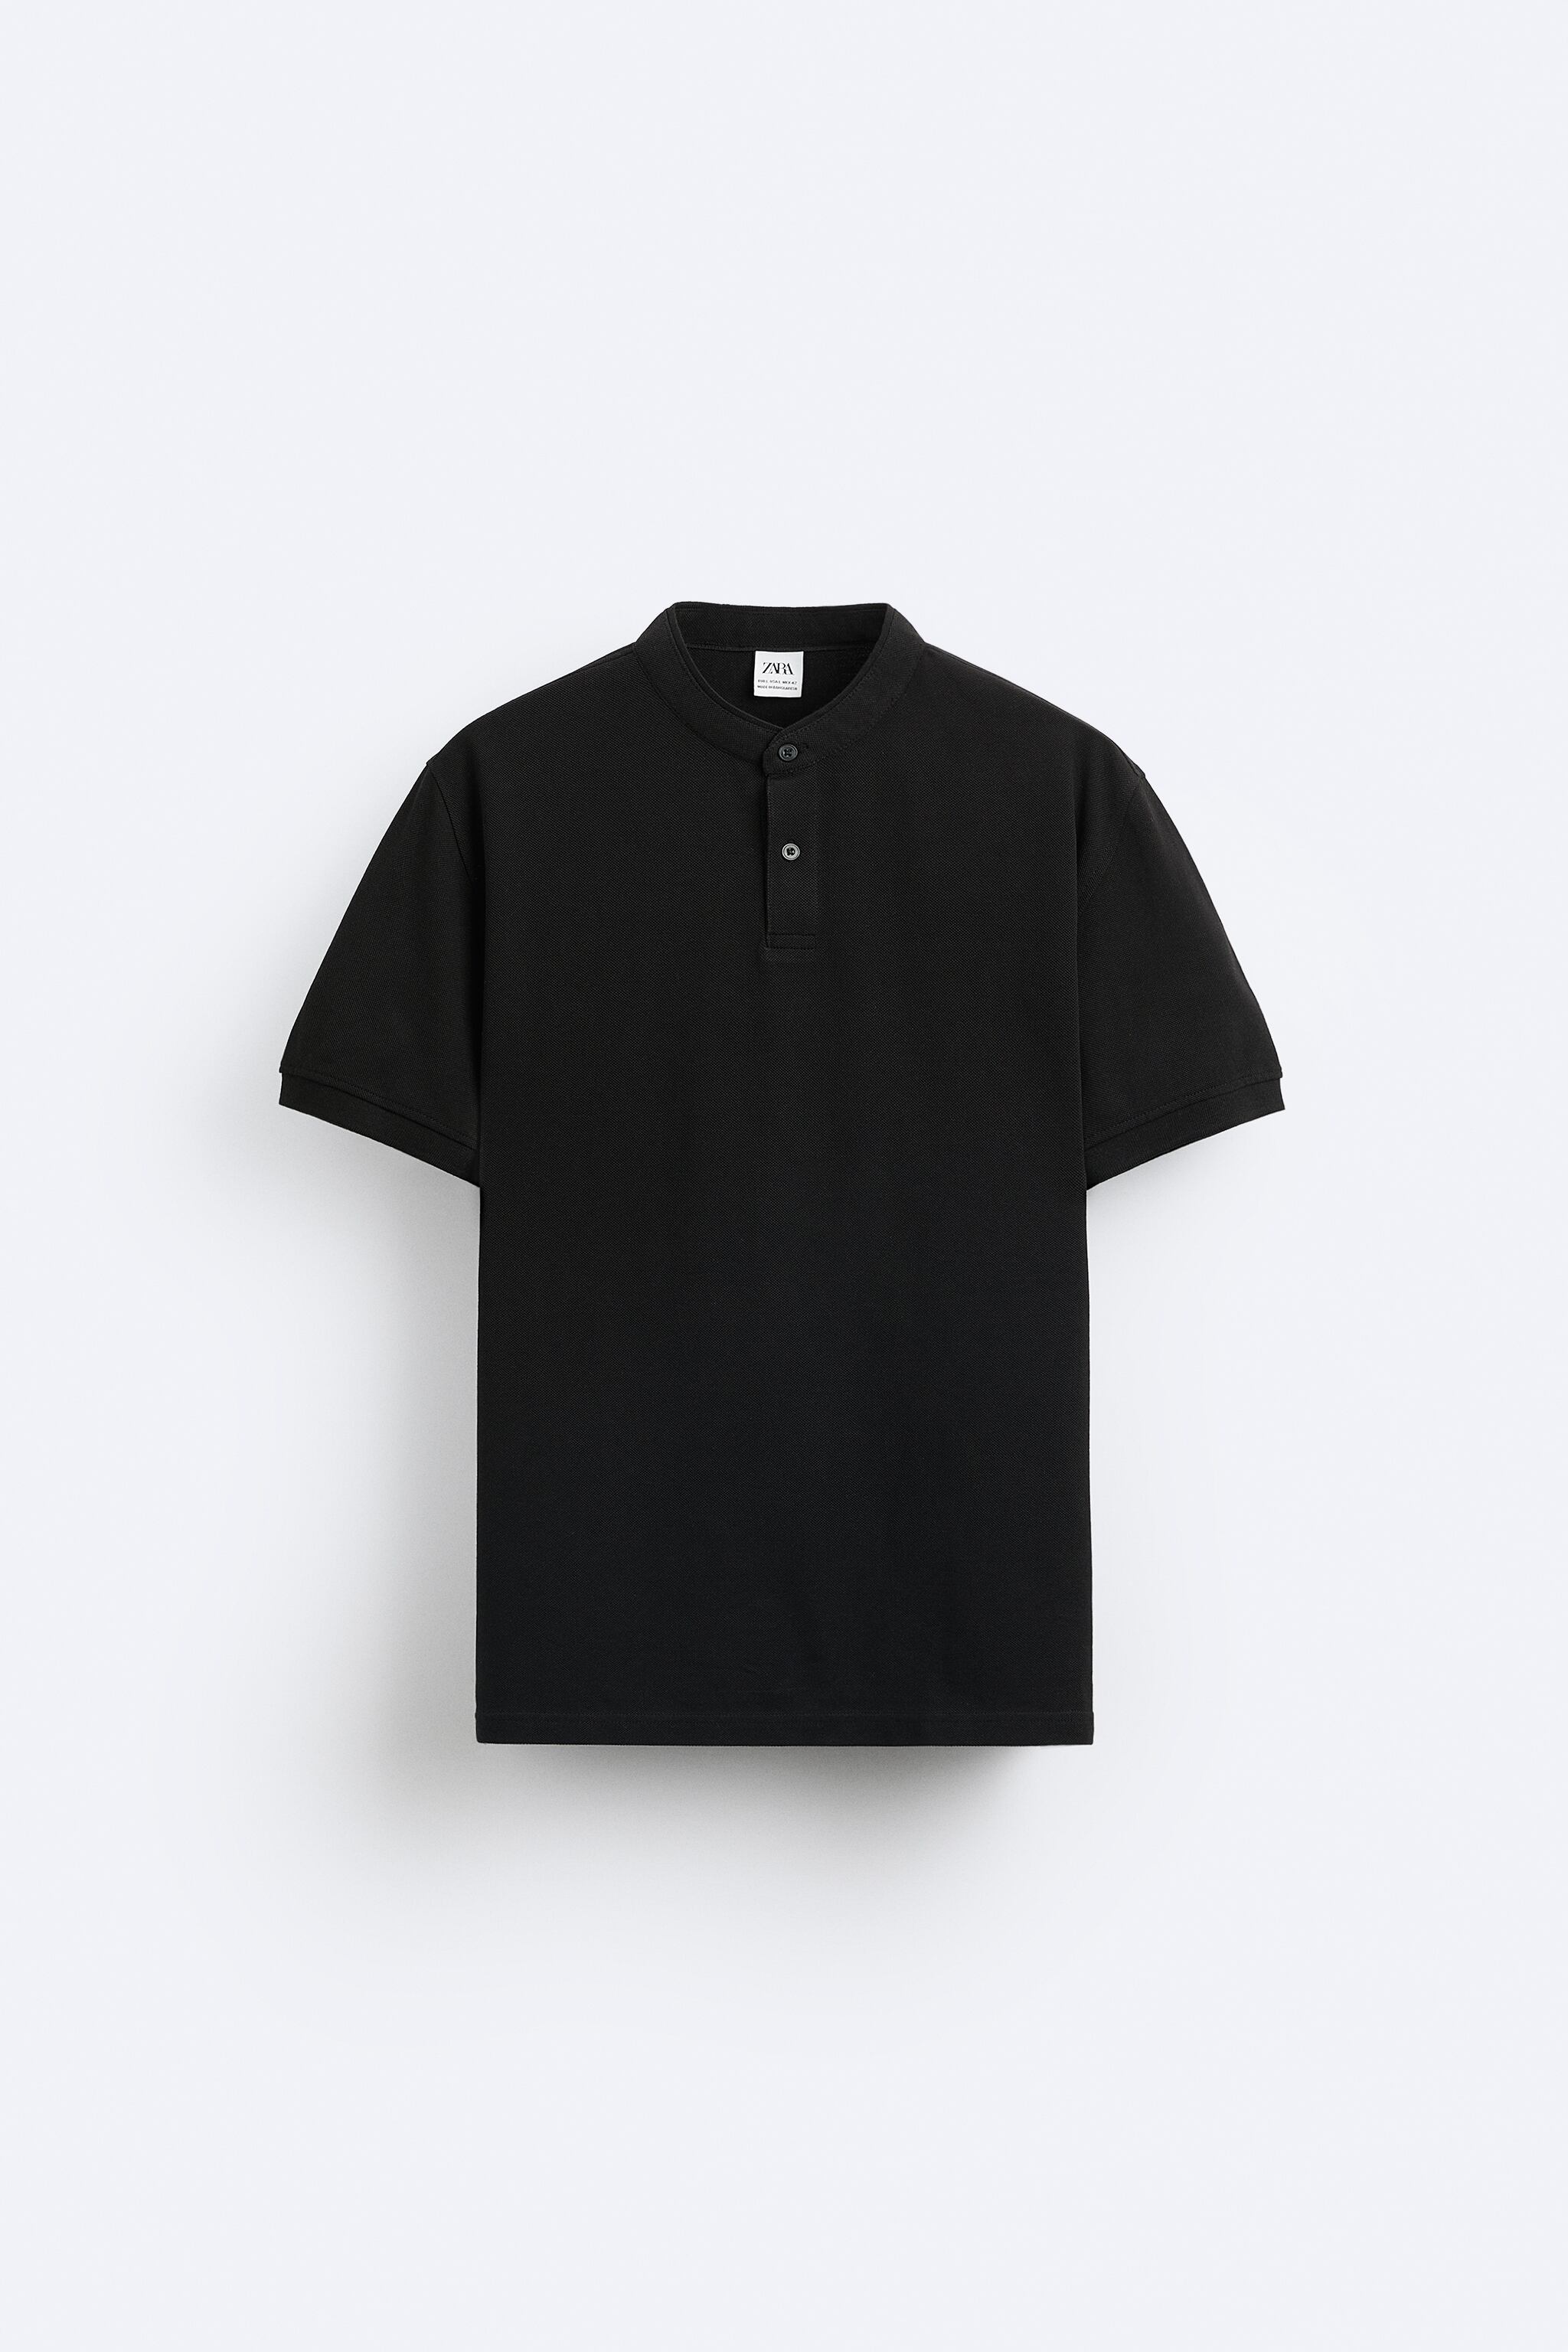 Band collar shirt with front button closure and short sleeves. Side vents at hem.